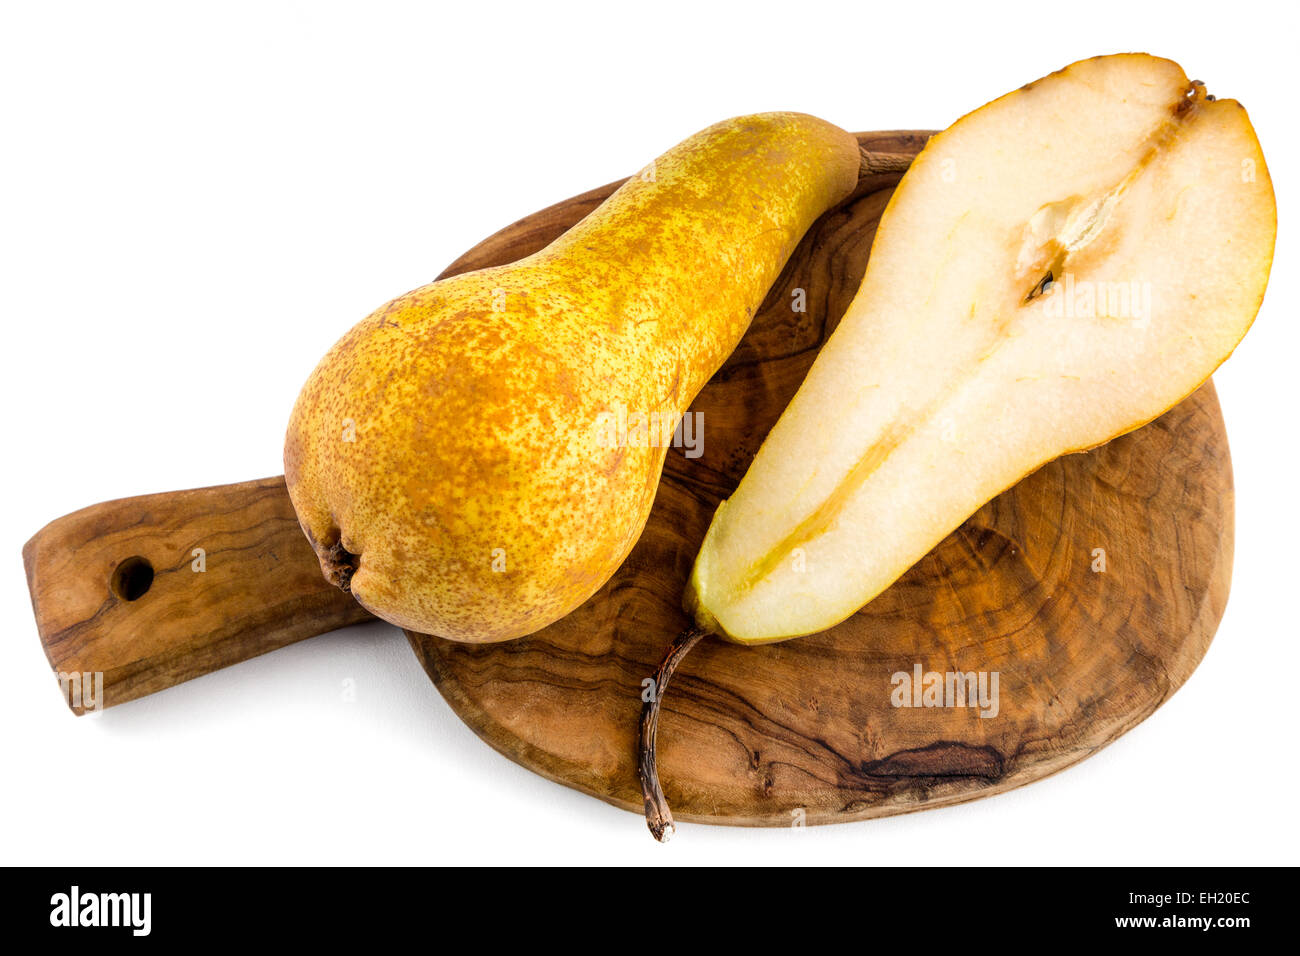 Pear on the table - whole and halved pear Stock Photo